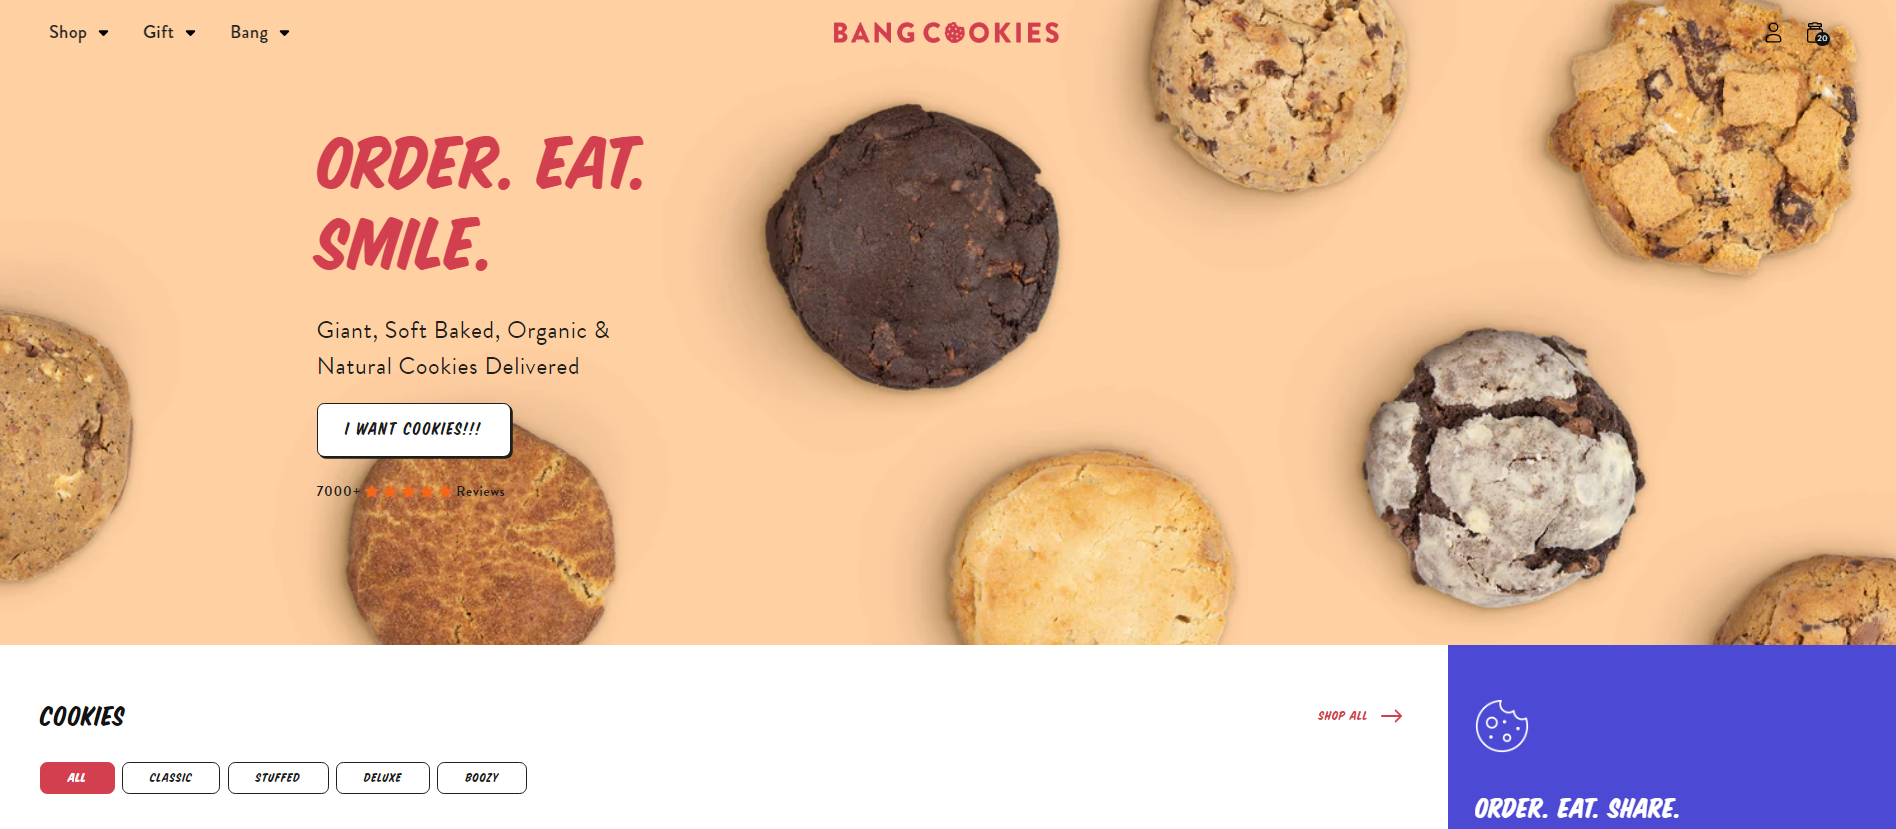 Bang Cookies, a Shopify Plus storefront